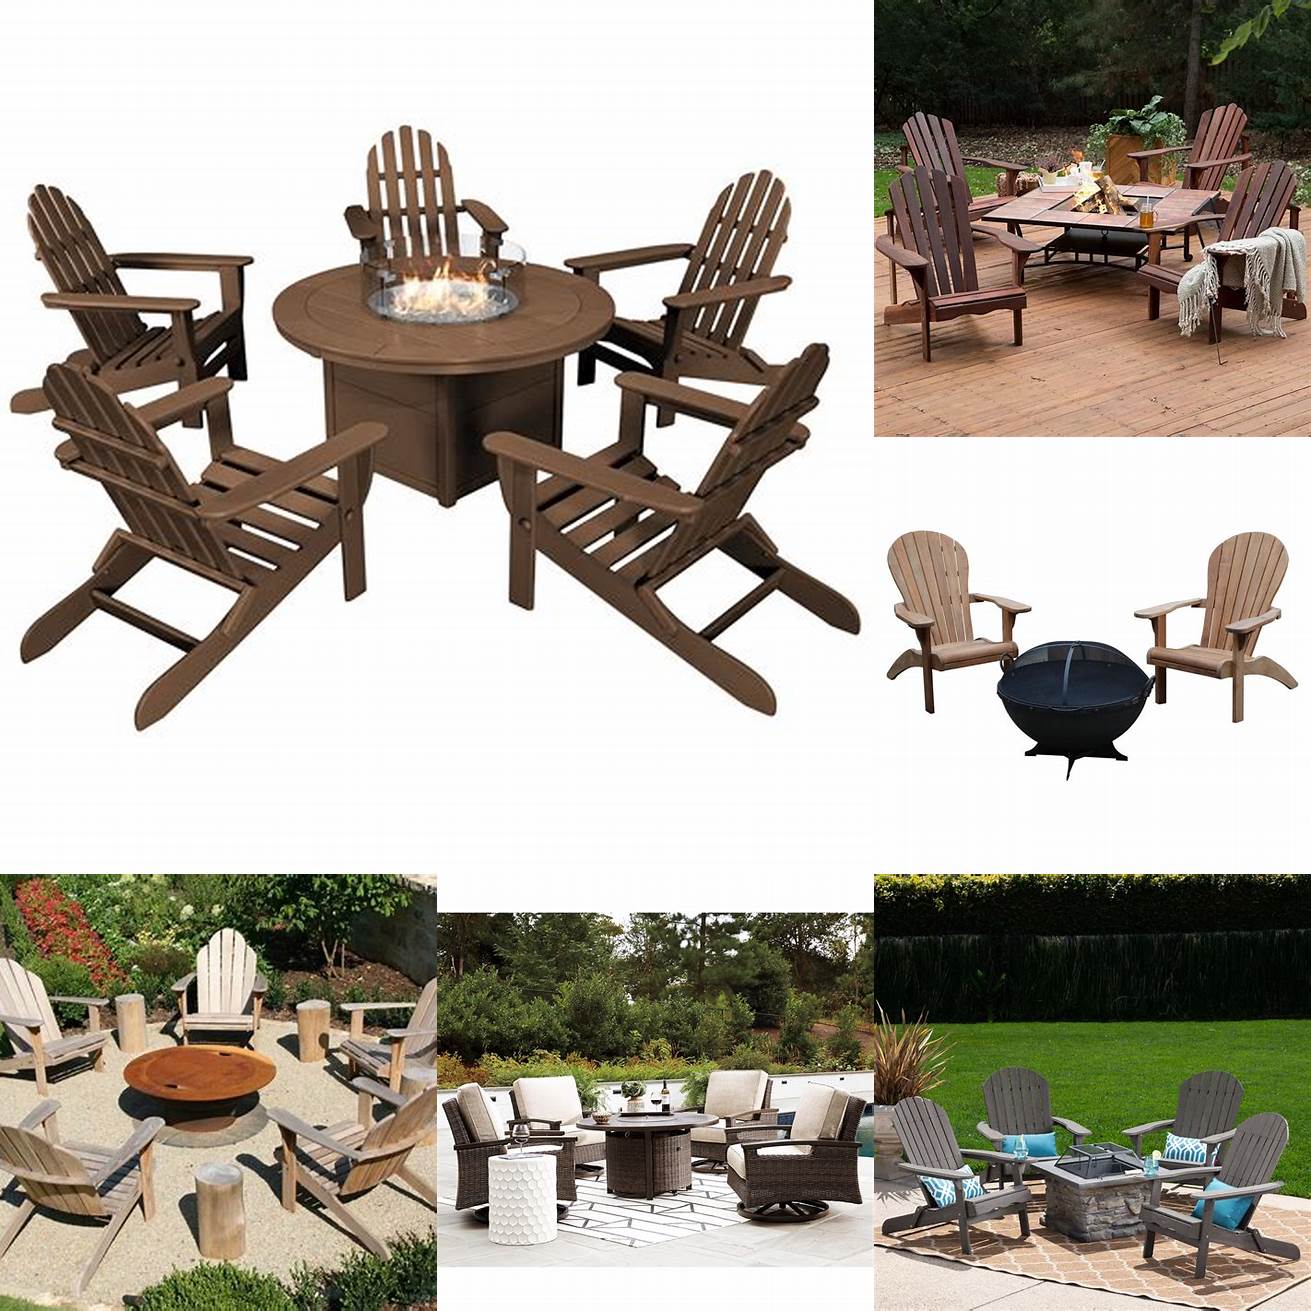 Teak Table and Chairs Around a Fire Pit